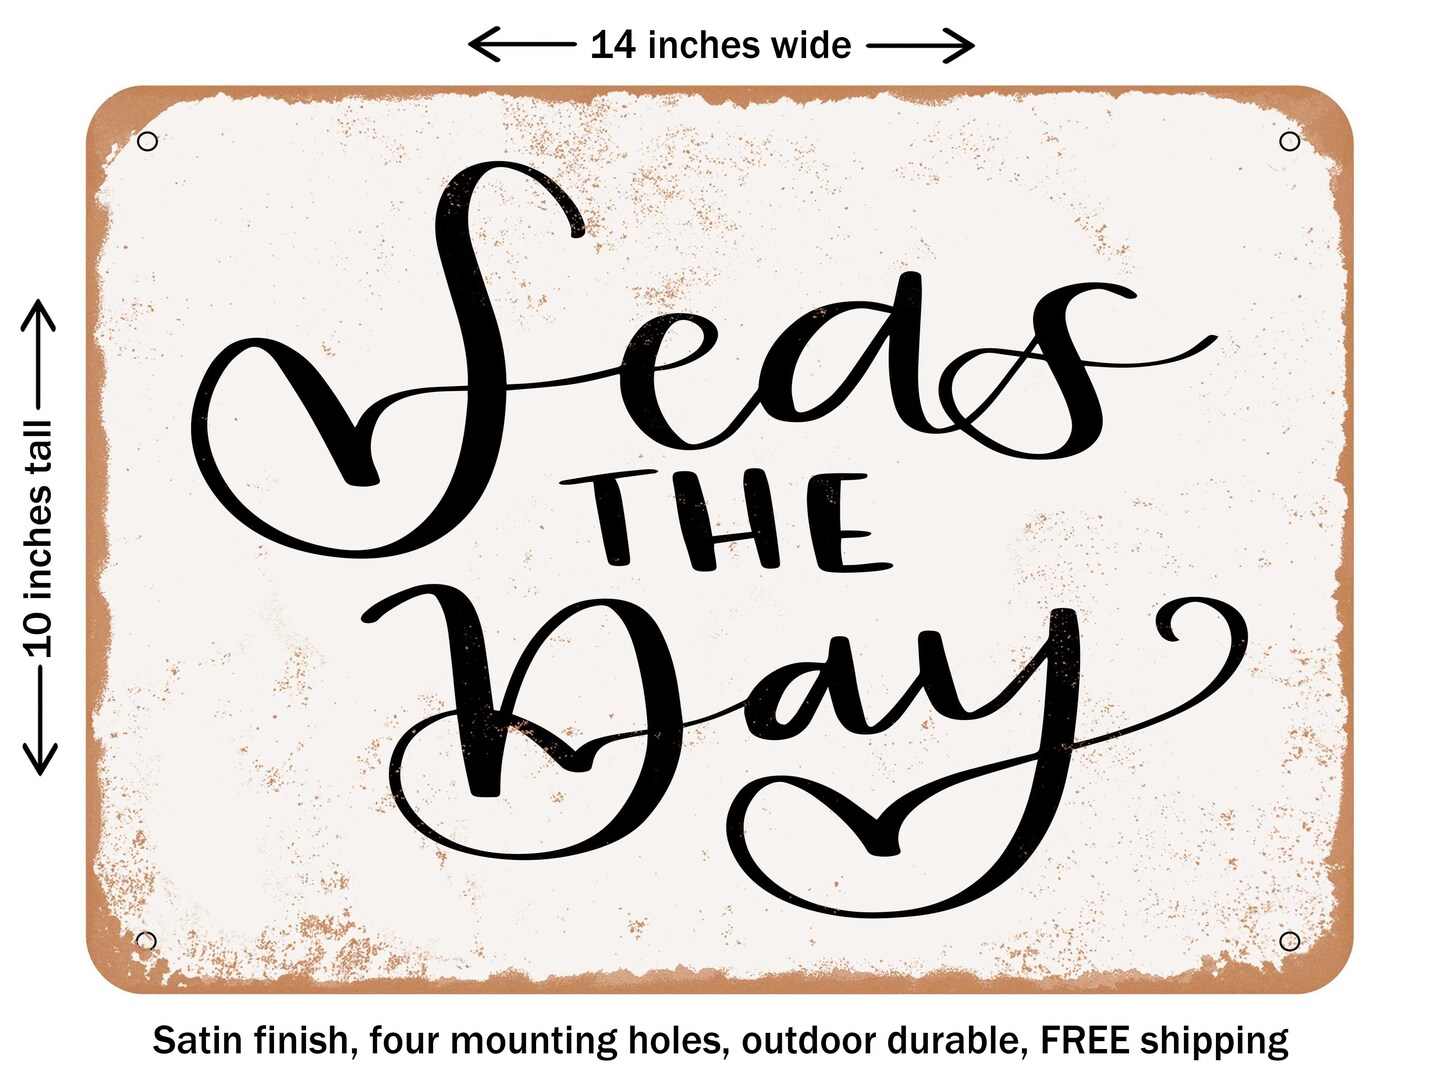 DECORATIVE METAL SIGN - Seas the day 2 - Vintage Rusty Look